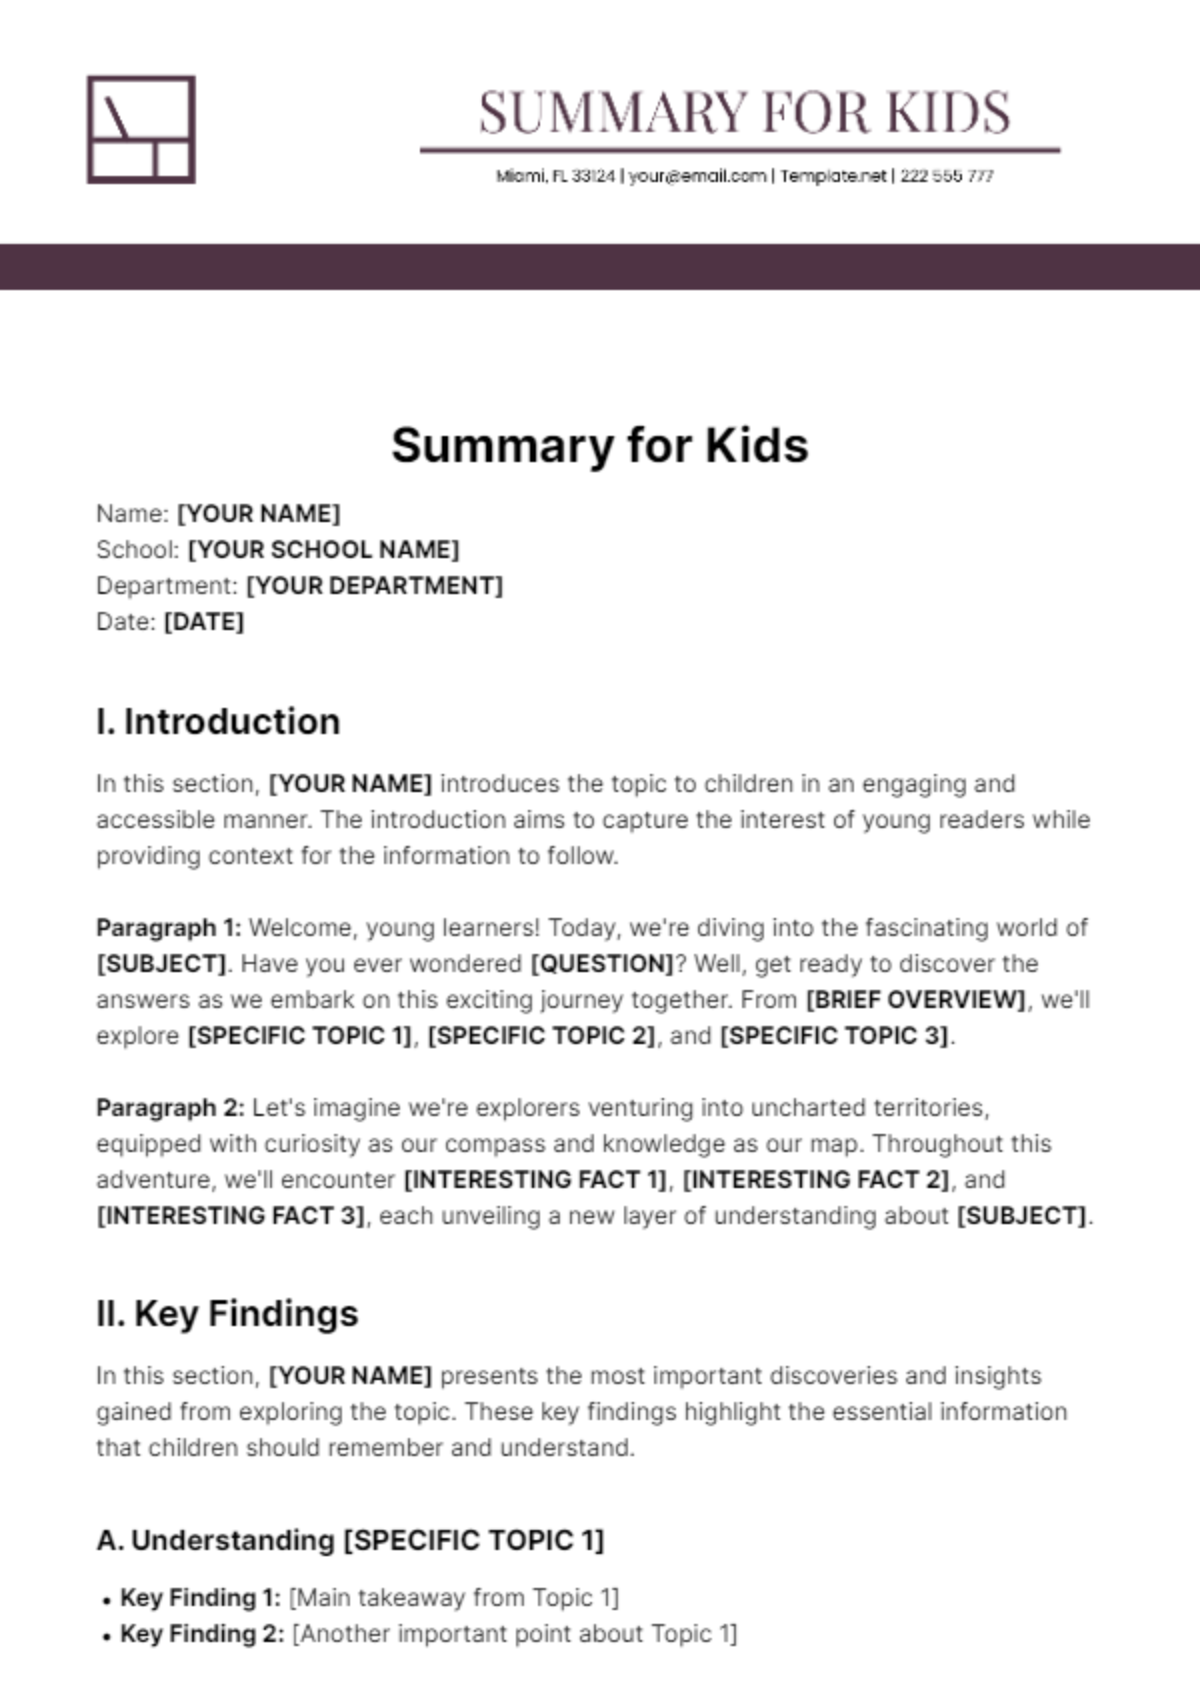 Summary for Kids Template